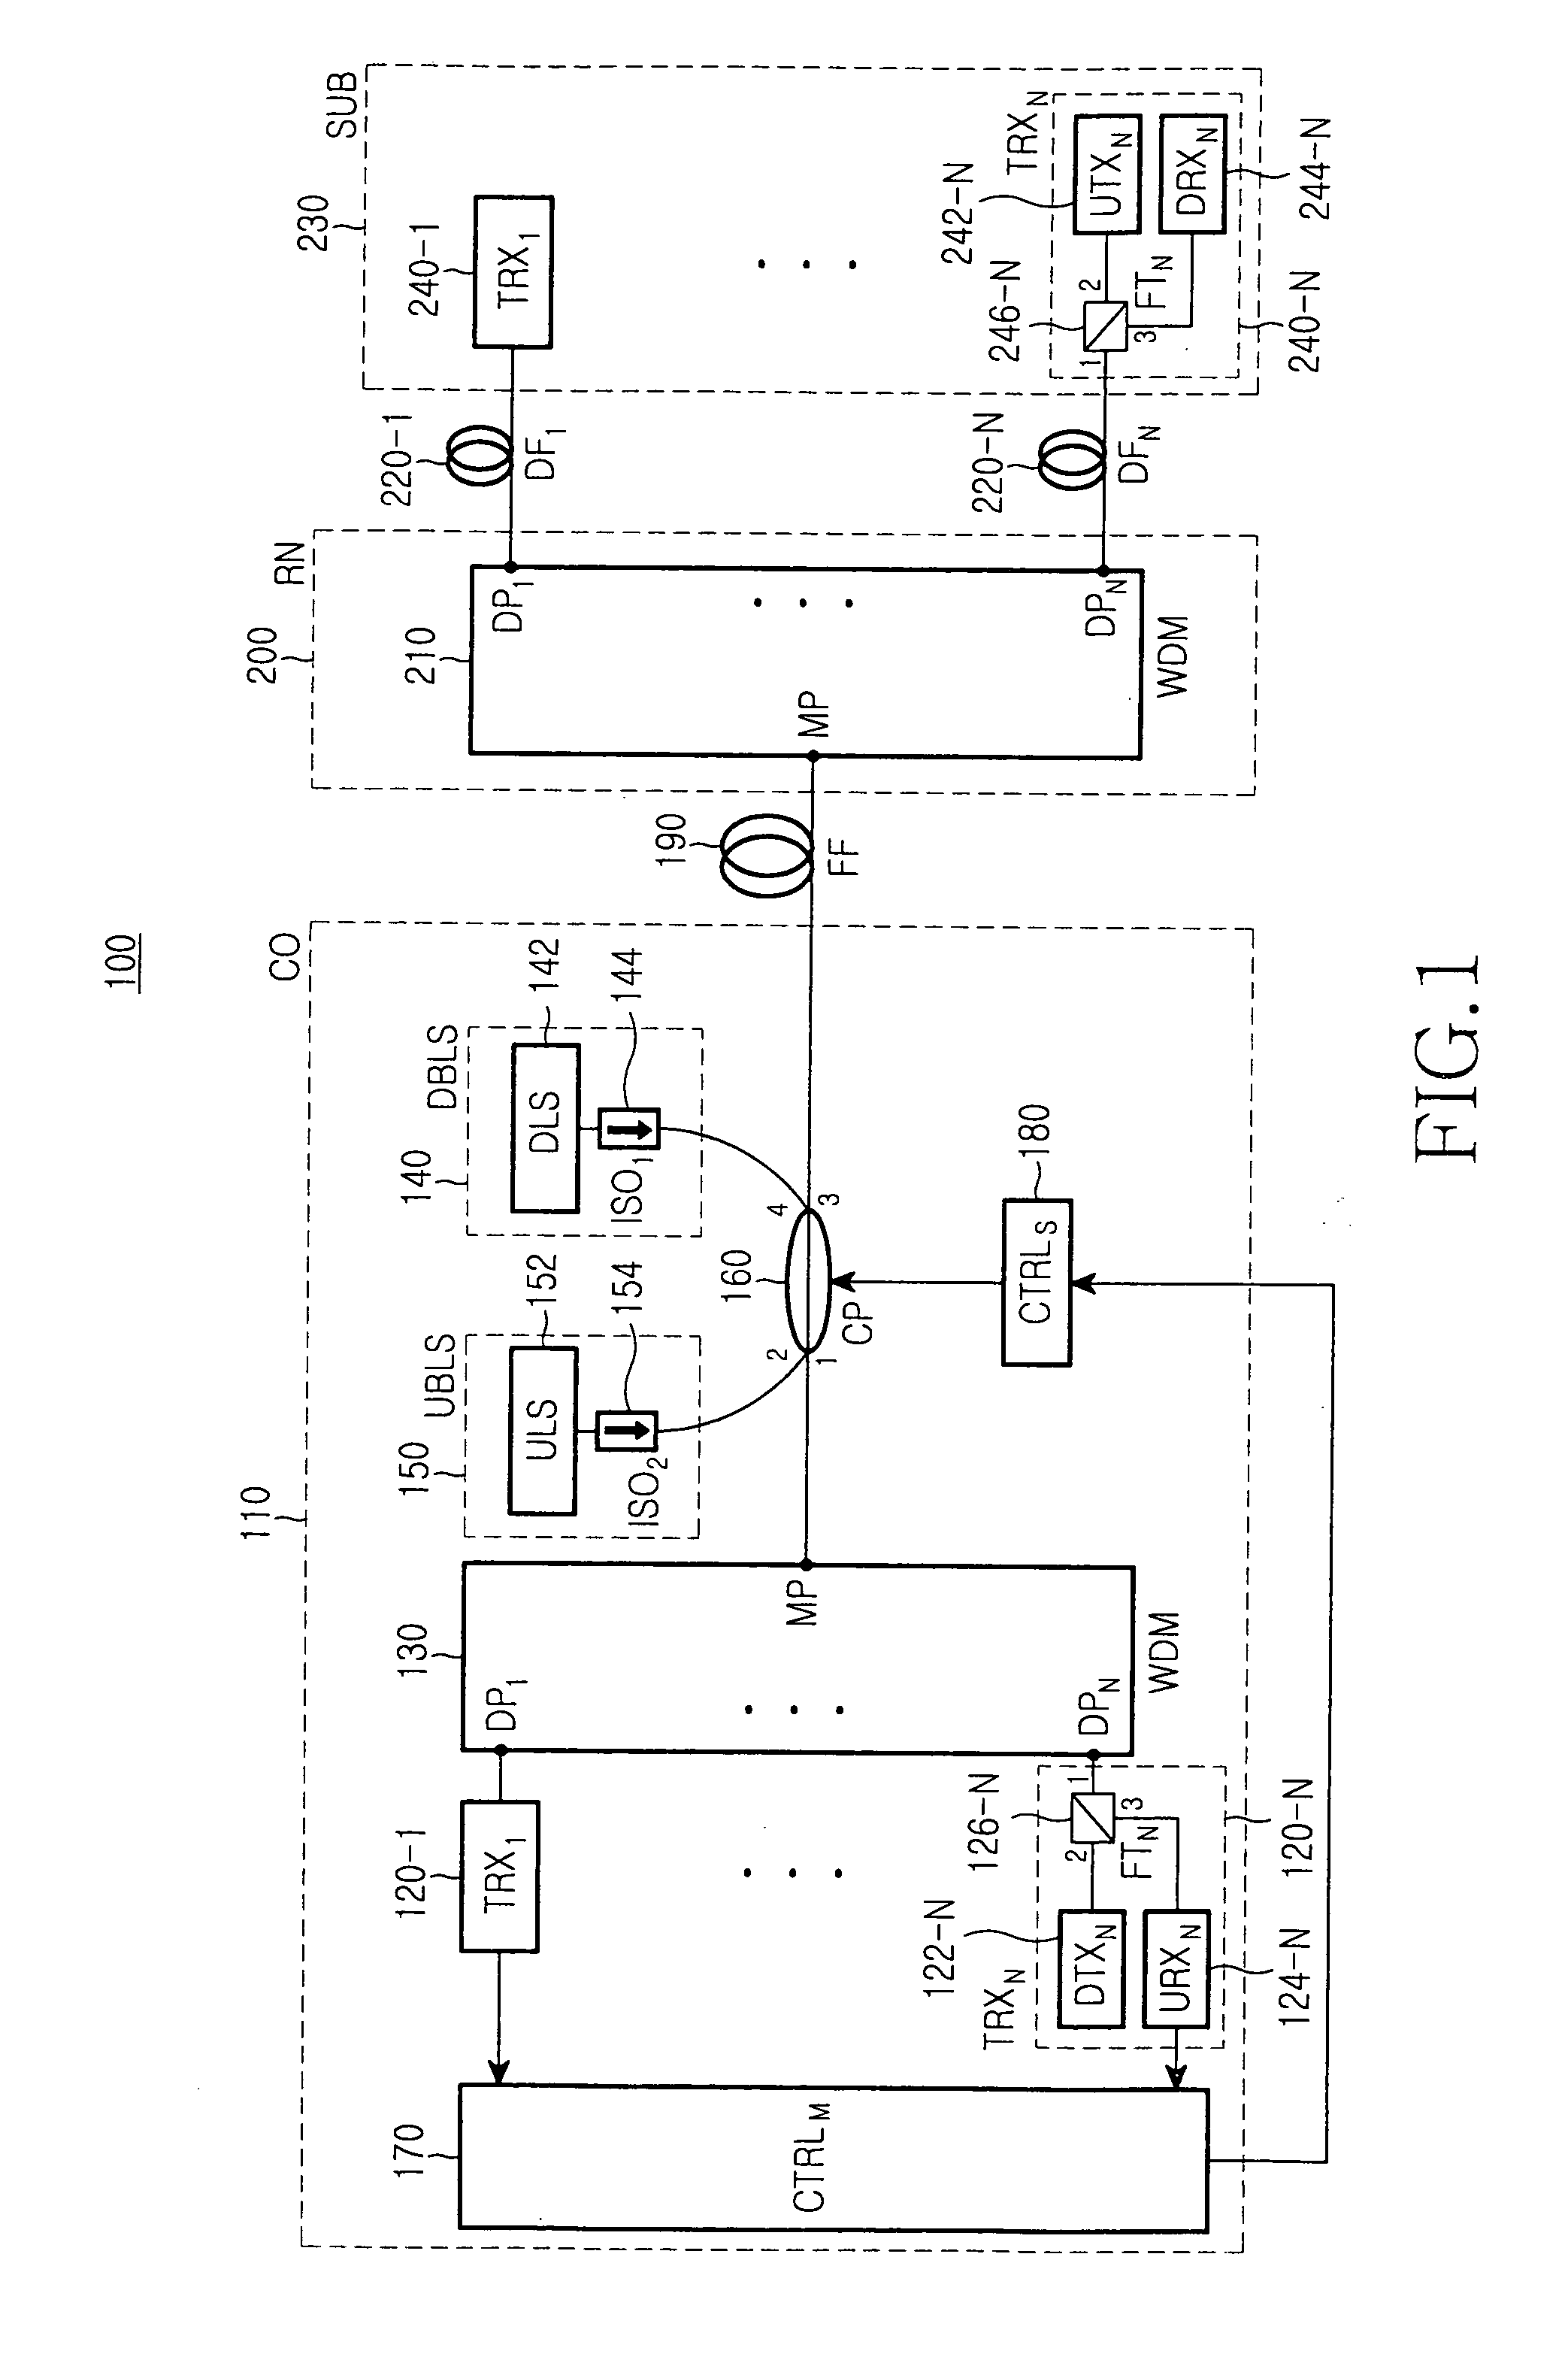 Wavelength-division-multiplexed light source and wavelength-division-multiplexed passive optical network using the same